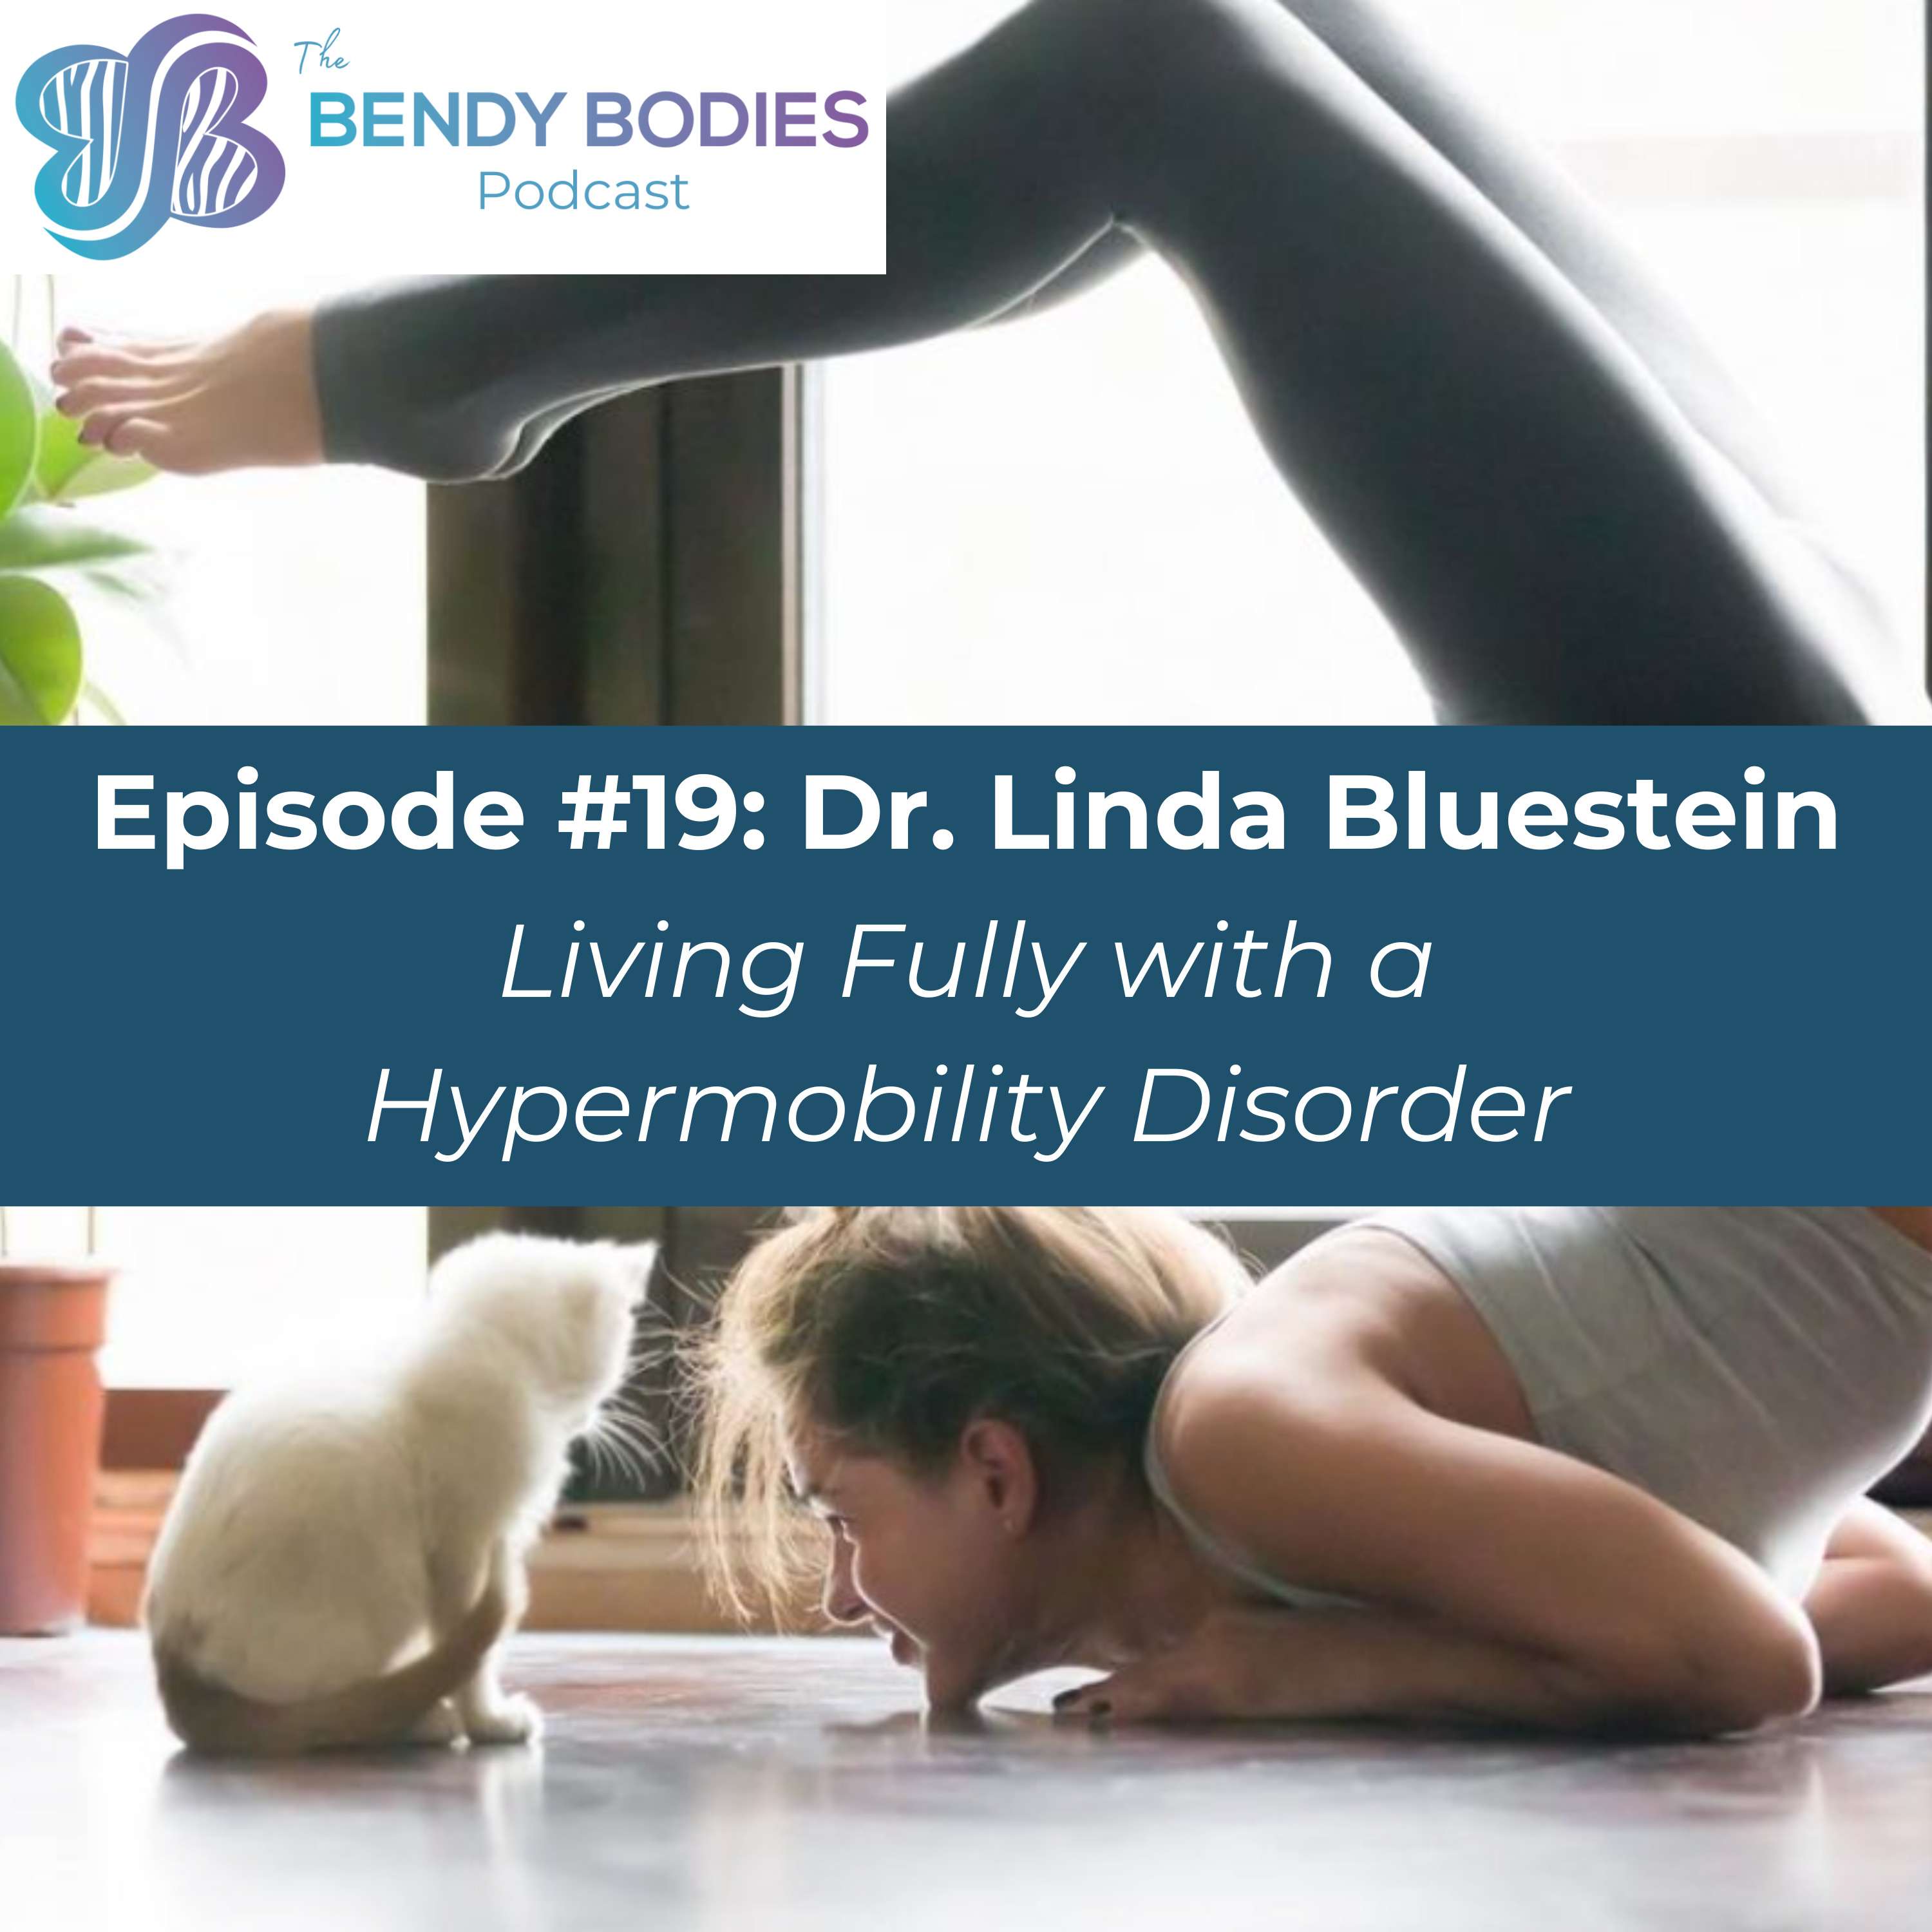 19. Living fully with a Hypermobility Disorder with Linda Bluestein, M.D.